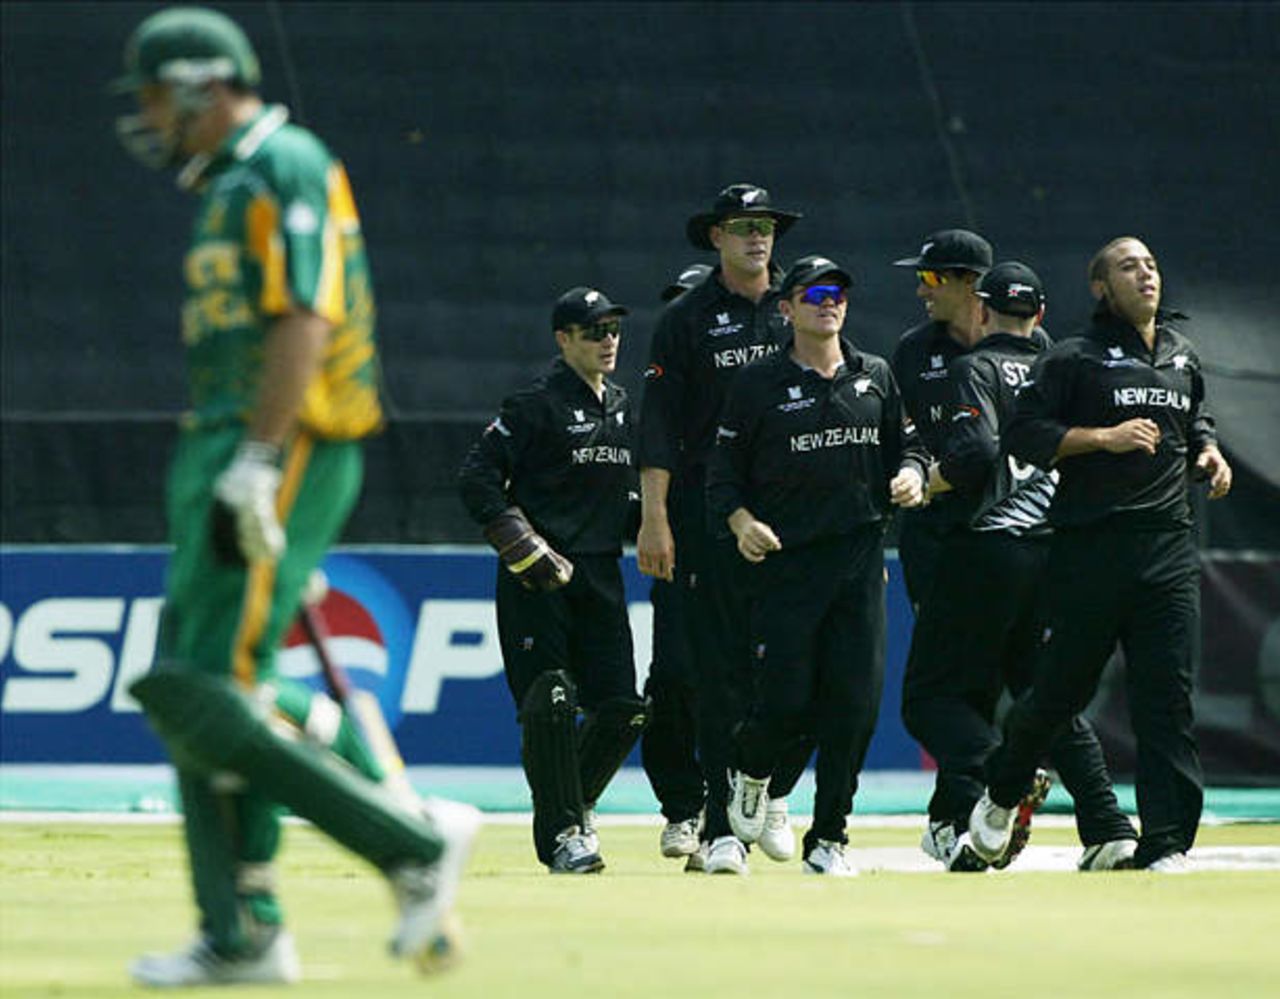 South Africa v New Zealand, World Cup, Johannesburg, 16 Febriary 2003